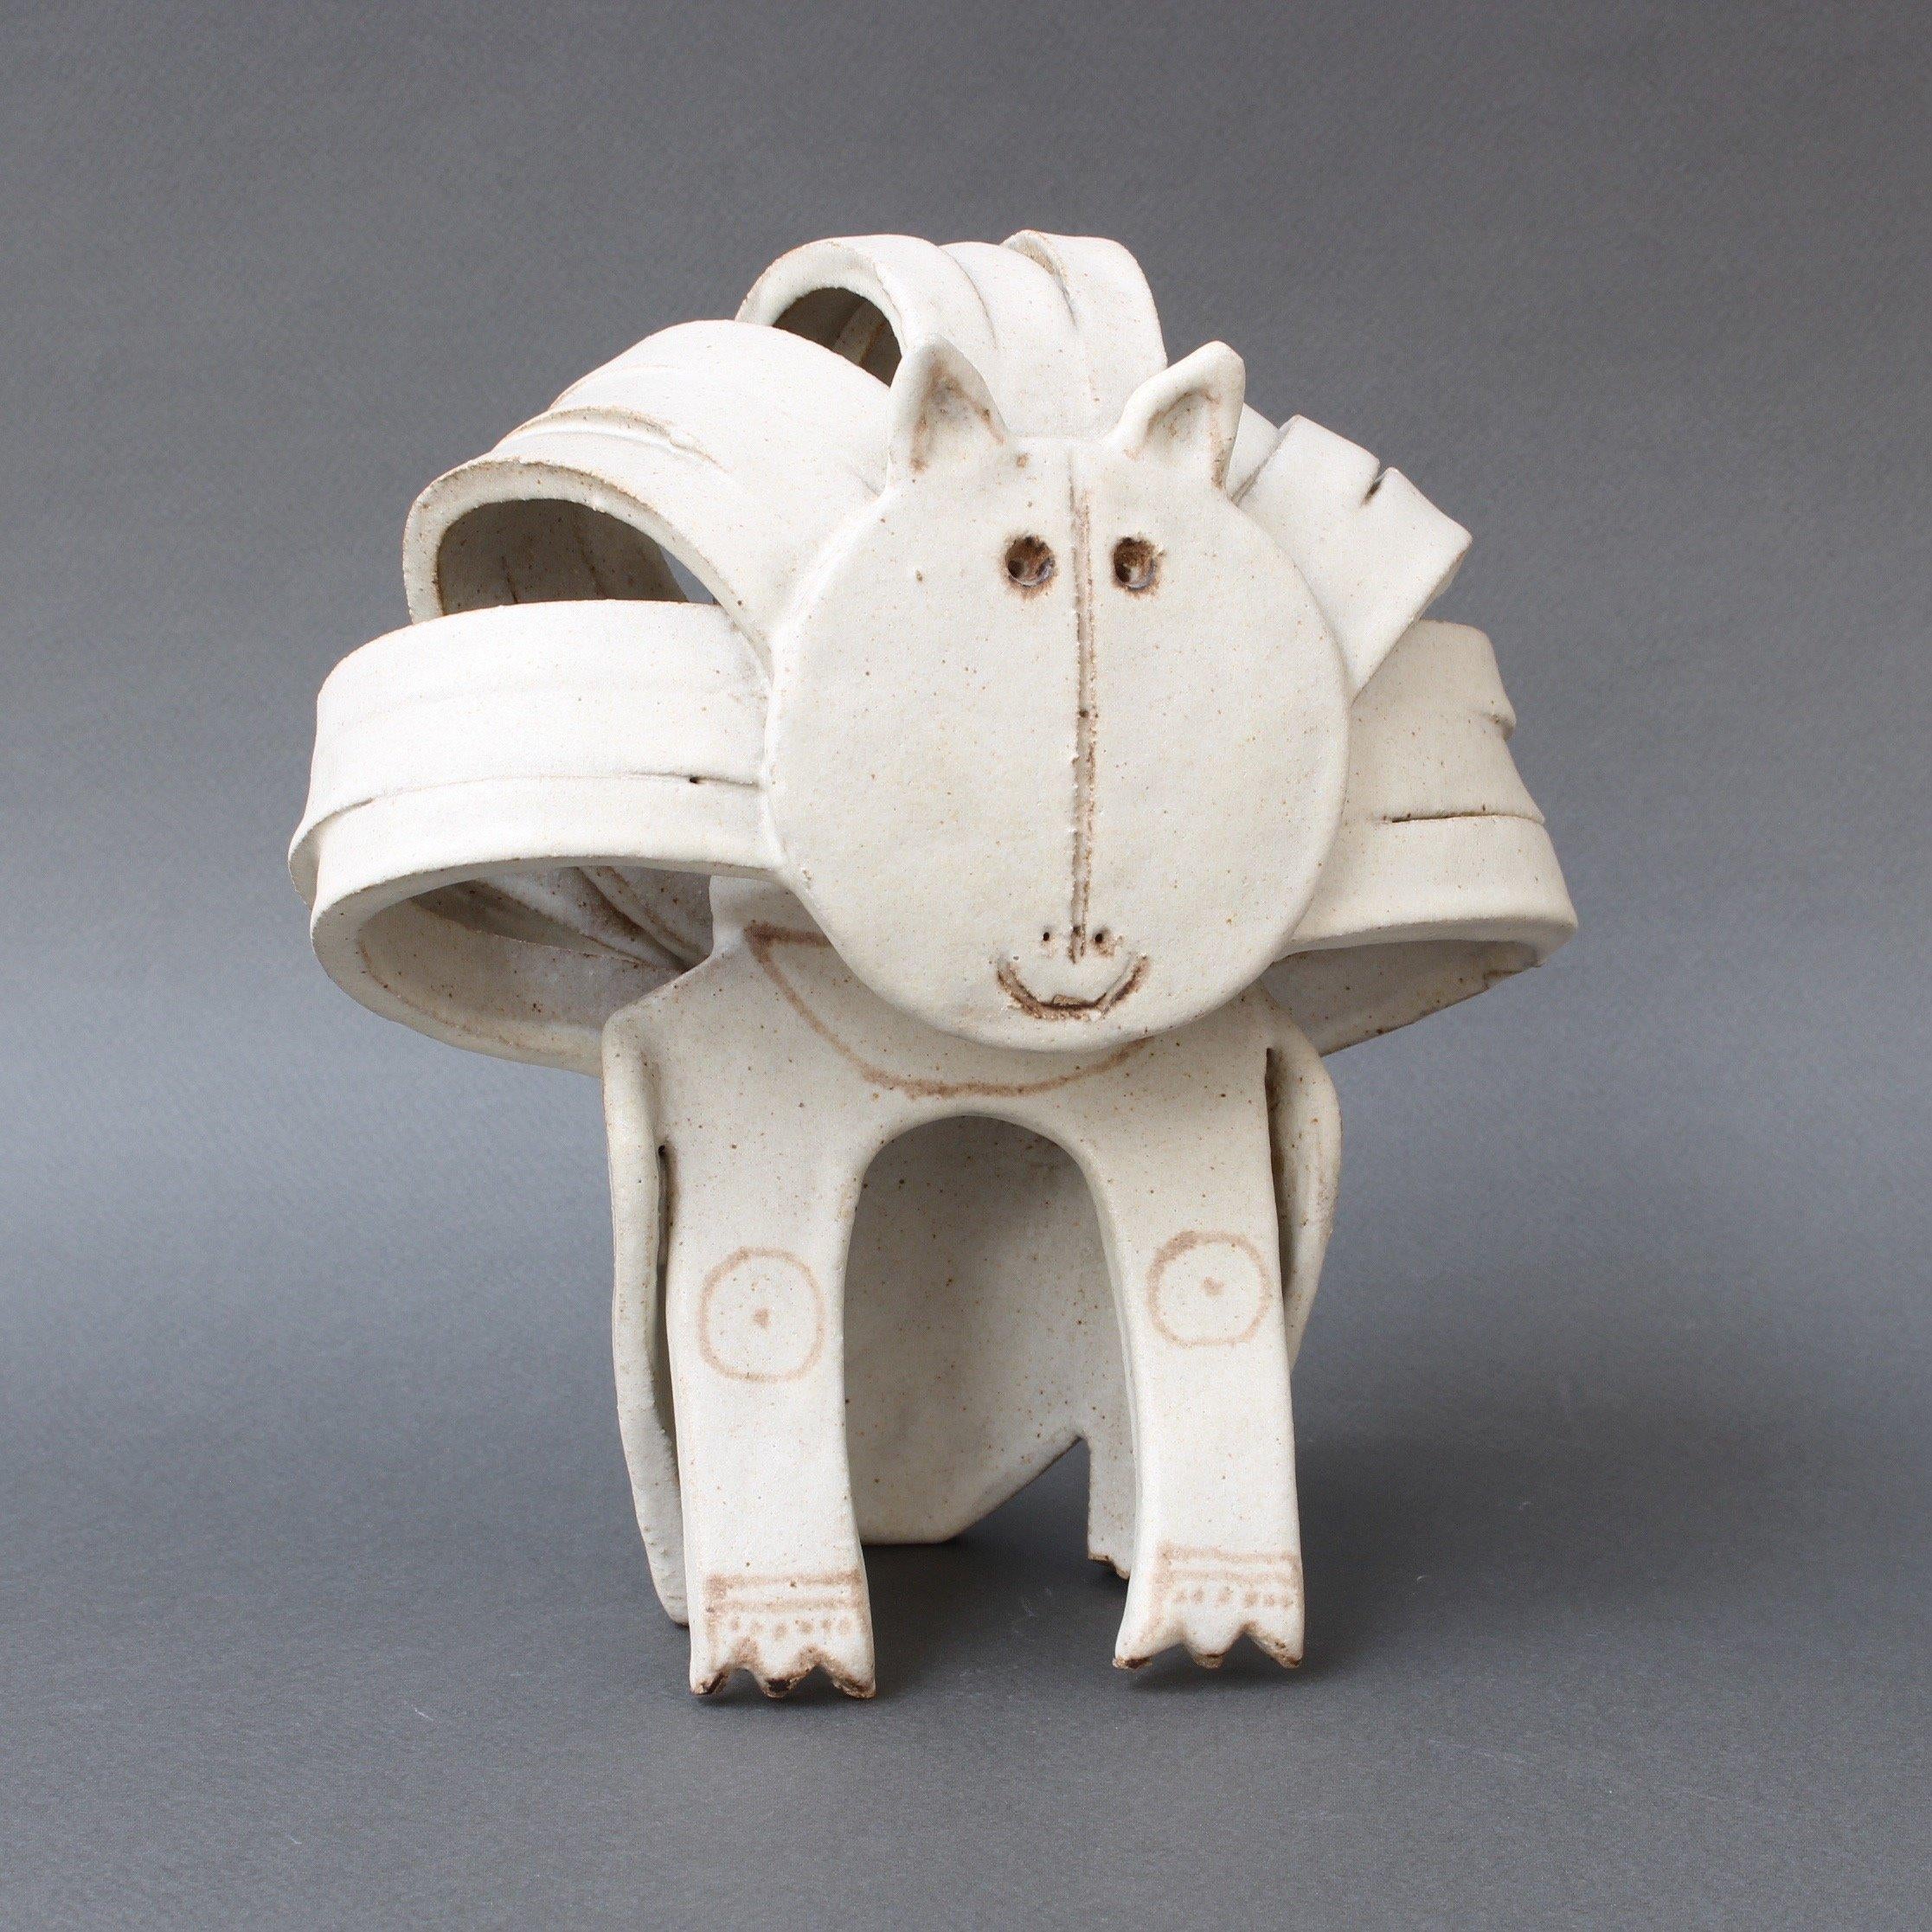 Ceramic cat or lion sculpture by ceramicist Bruno Gambone, circa 1970s. This enchanting seated cat sculpture is truly a work of art. It is whimsical, yet beautiful in its use of the pared-down design elements associated with minimalism. Its